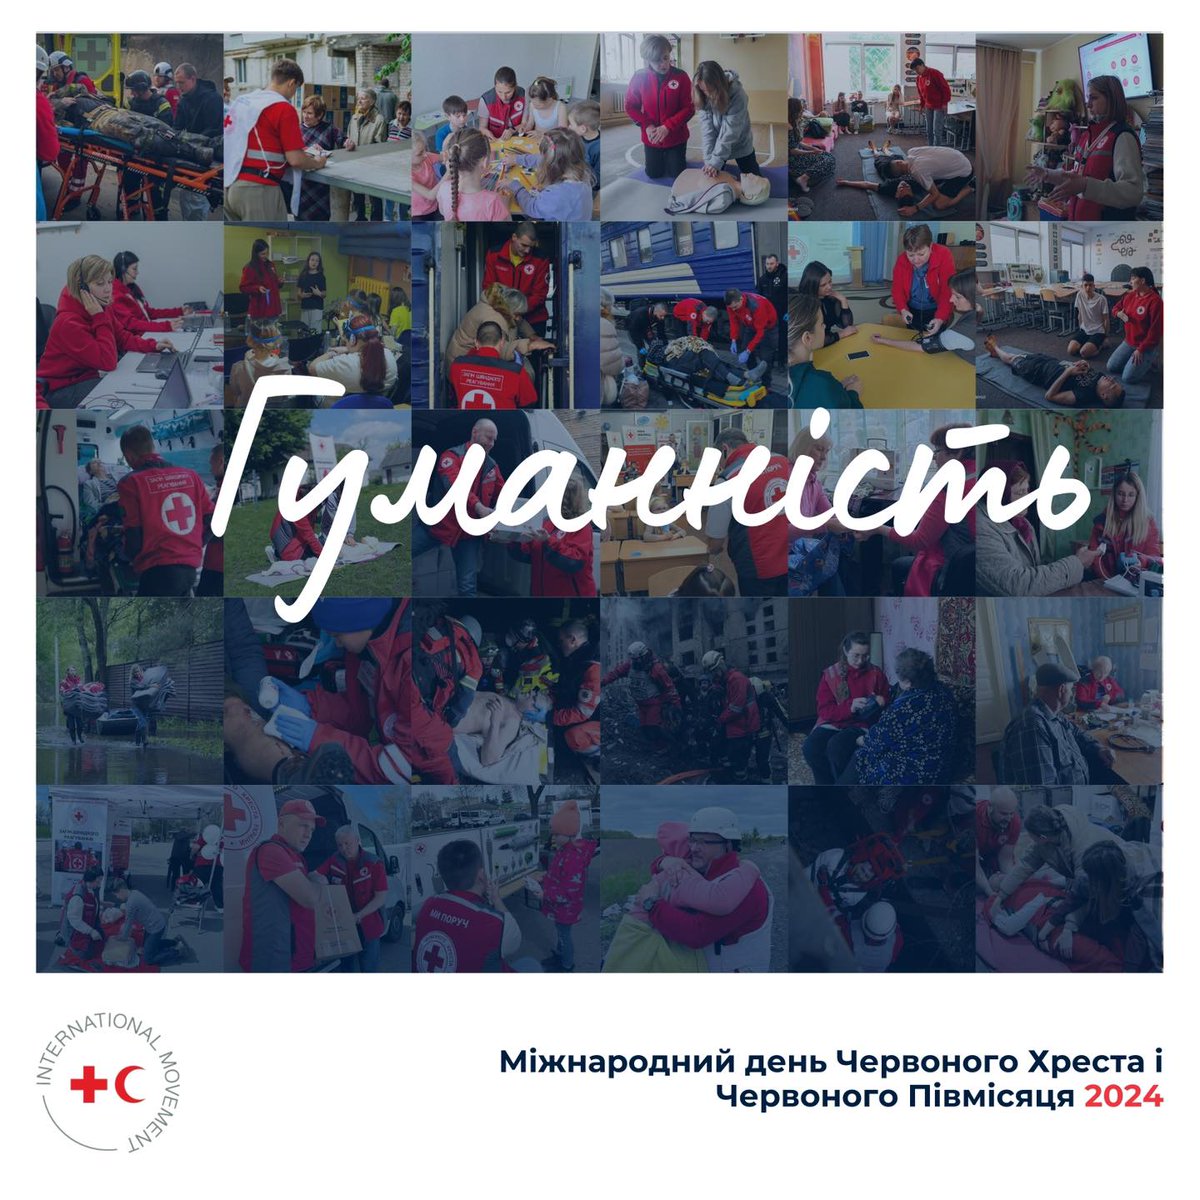 👏We extend our gratitude to our volunteers, staff, partners, and friends within the International Red Cross and Red Crescent Movement for their unwavering support of Ukrainians. Warm wishes on World Red Cross and Red Crescent Day! #KeepingHumanityAlive #RedCrescentDay